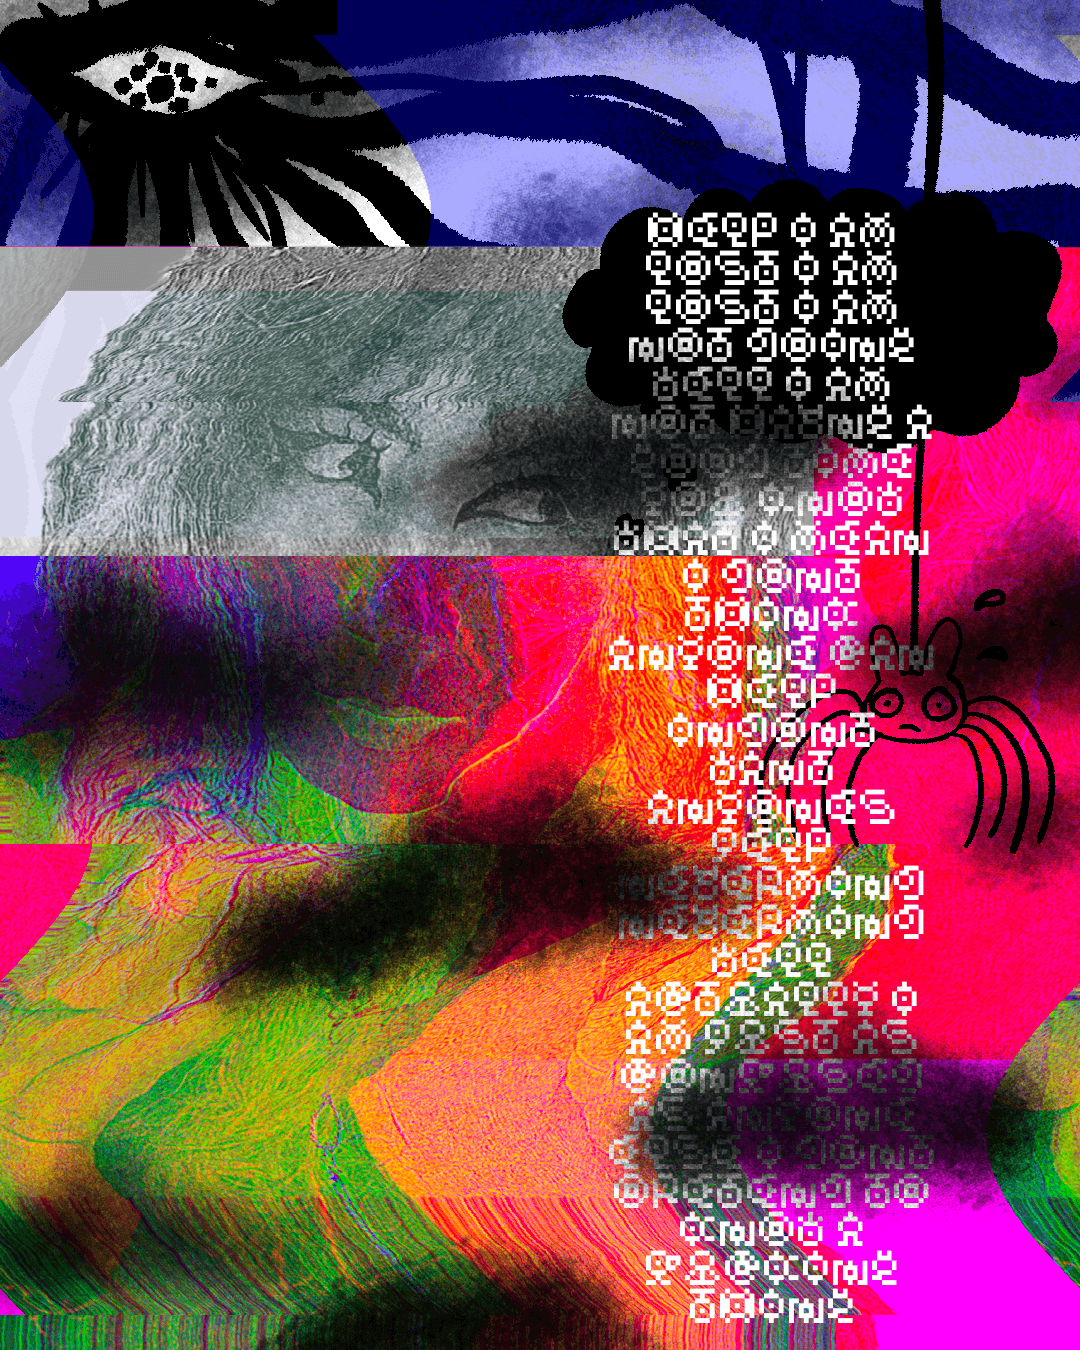 A glitchy illustration of messed up text, abstract colors and black clouds.